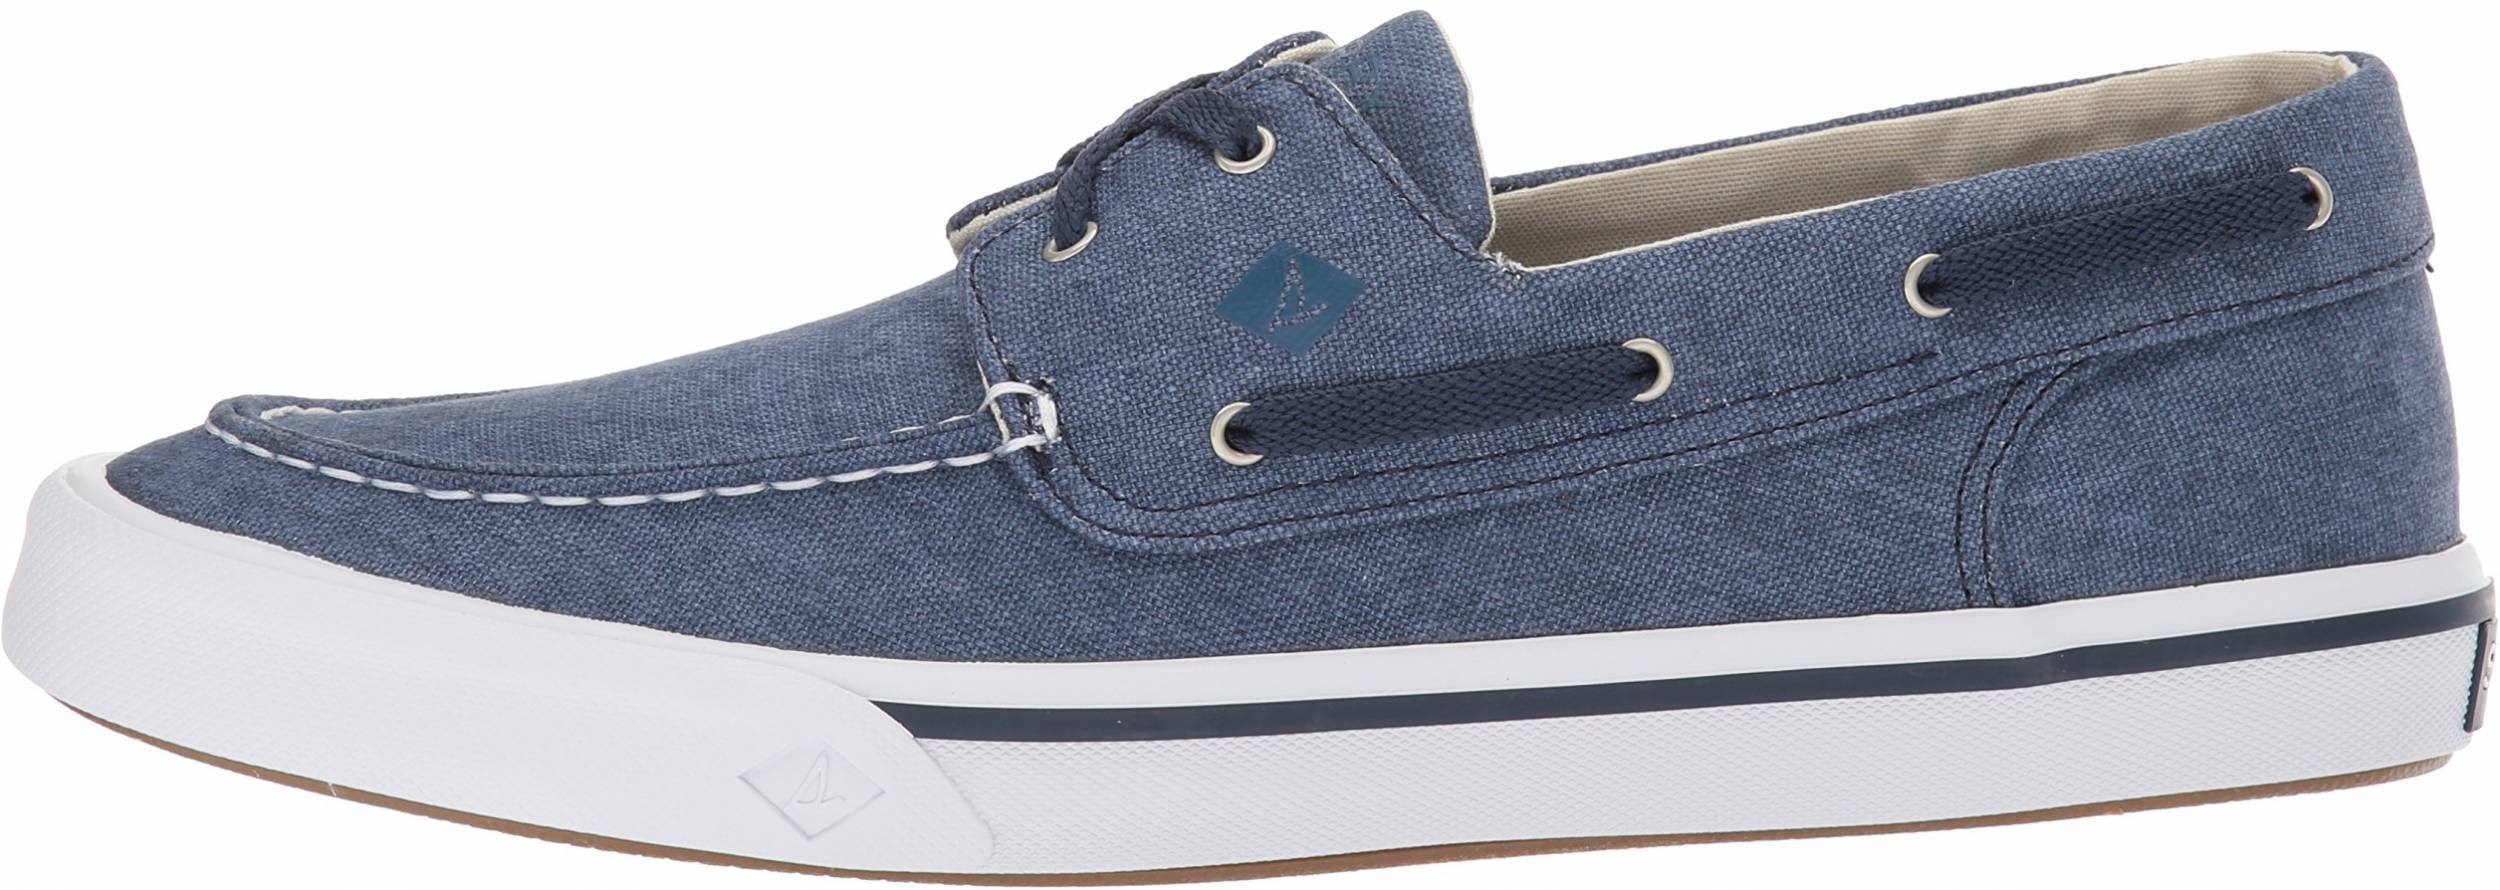 navy blue sperry shoes